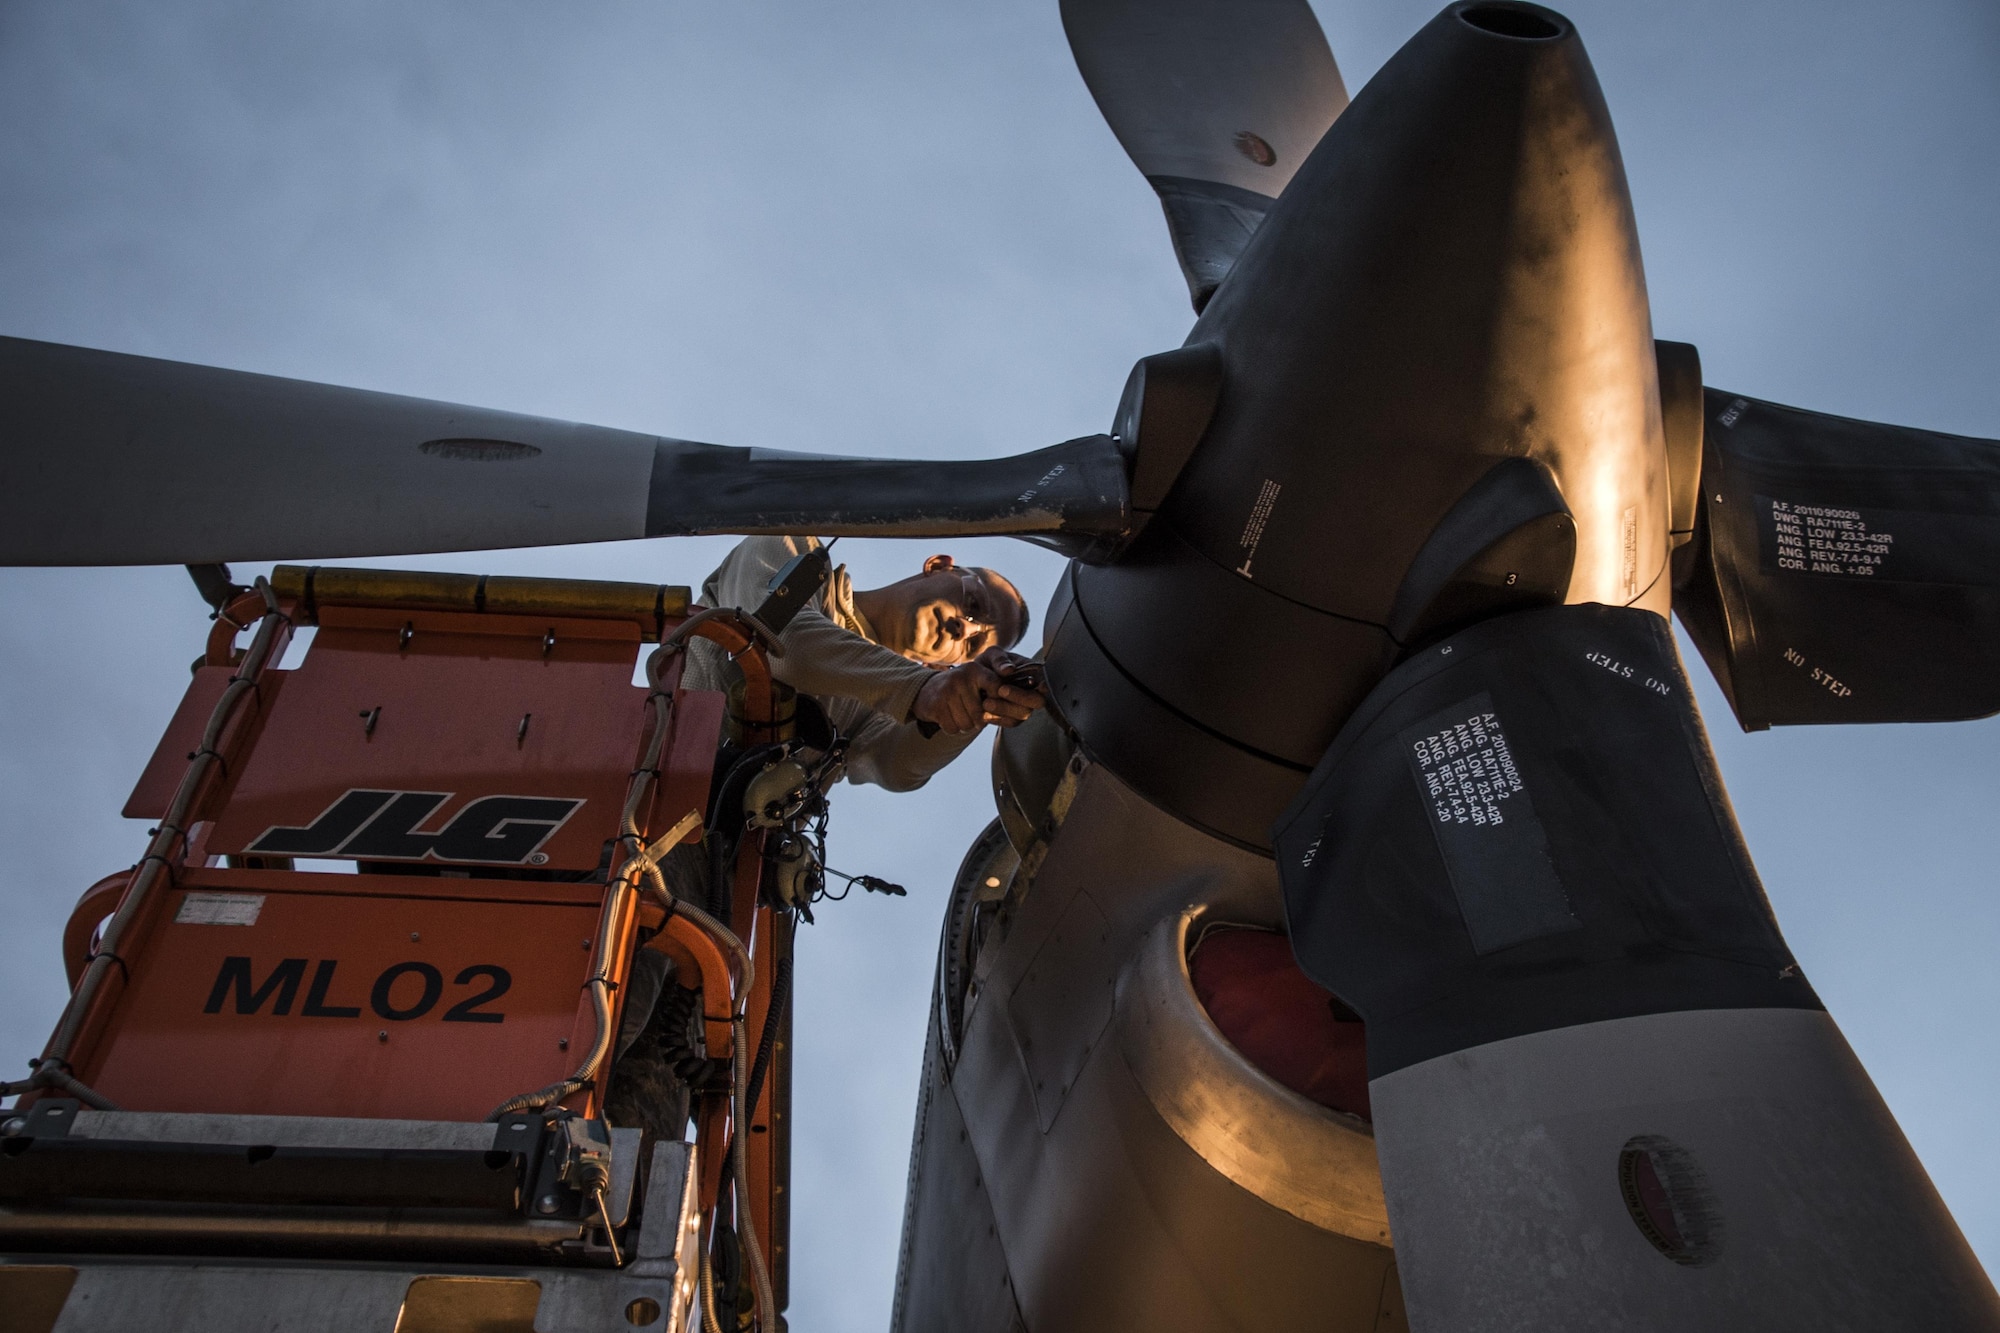 Members of the 179th Airlift Wing work on an engine of a C-130H Hercules Feb. 21, 2017, in Mansfield, Ohio. The 179th AW is always on mission to be the first choice to respond to community, state and federal missions with a trusted team of highly qualified Airmen. (U.S. Air National Guard photo/1st Lt. Paul Stennett)